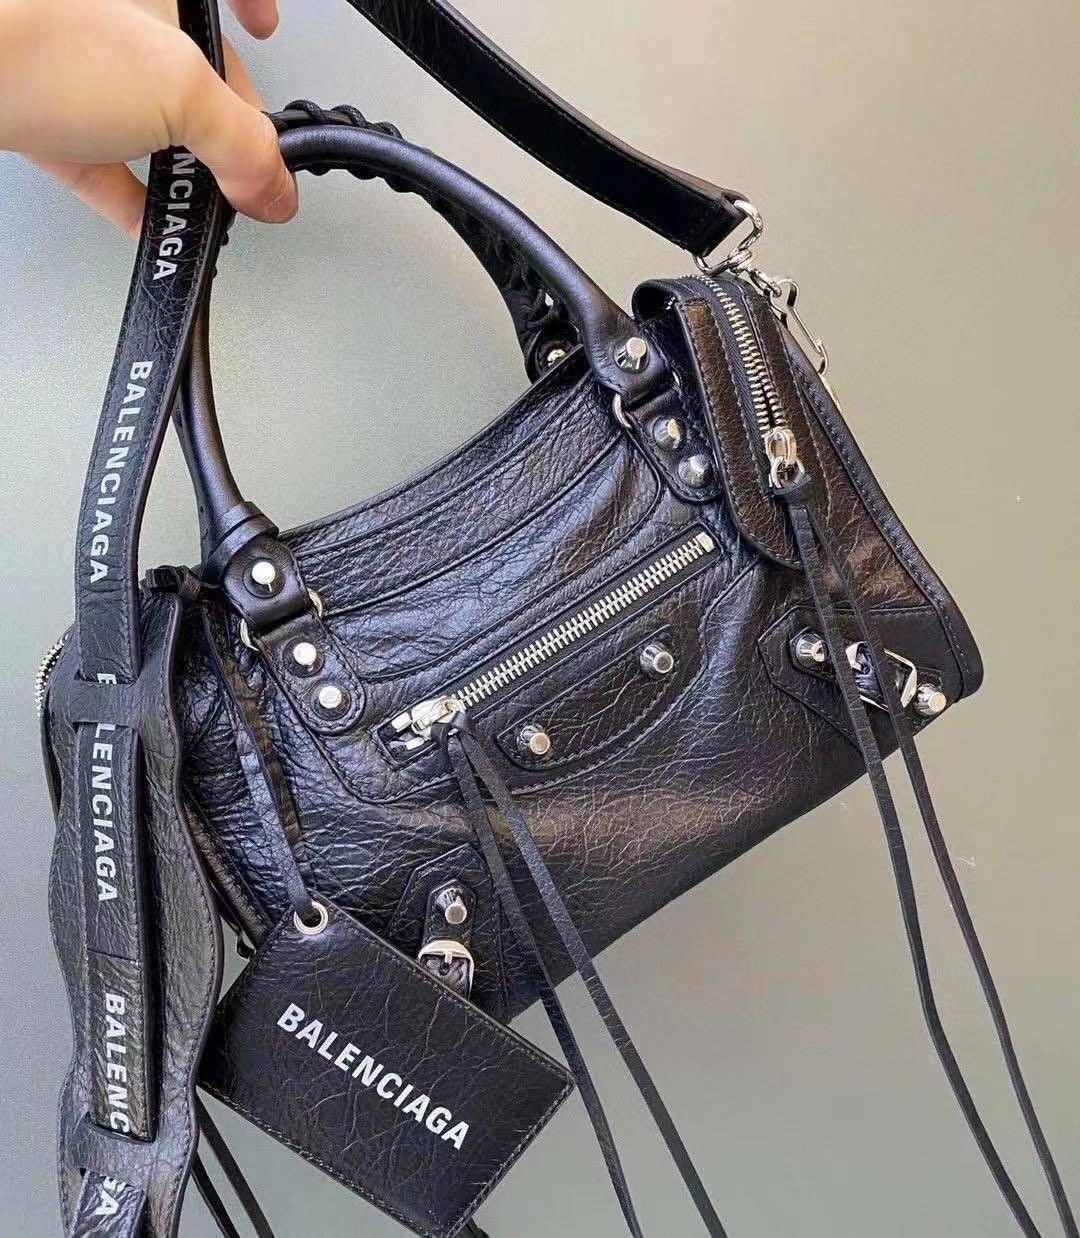 Balenciaga Introduces new Small Classic City Bag Size  Spotted Fashion